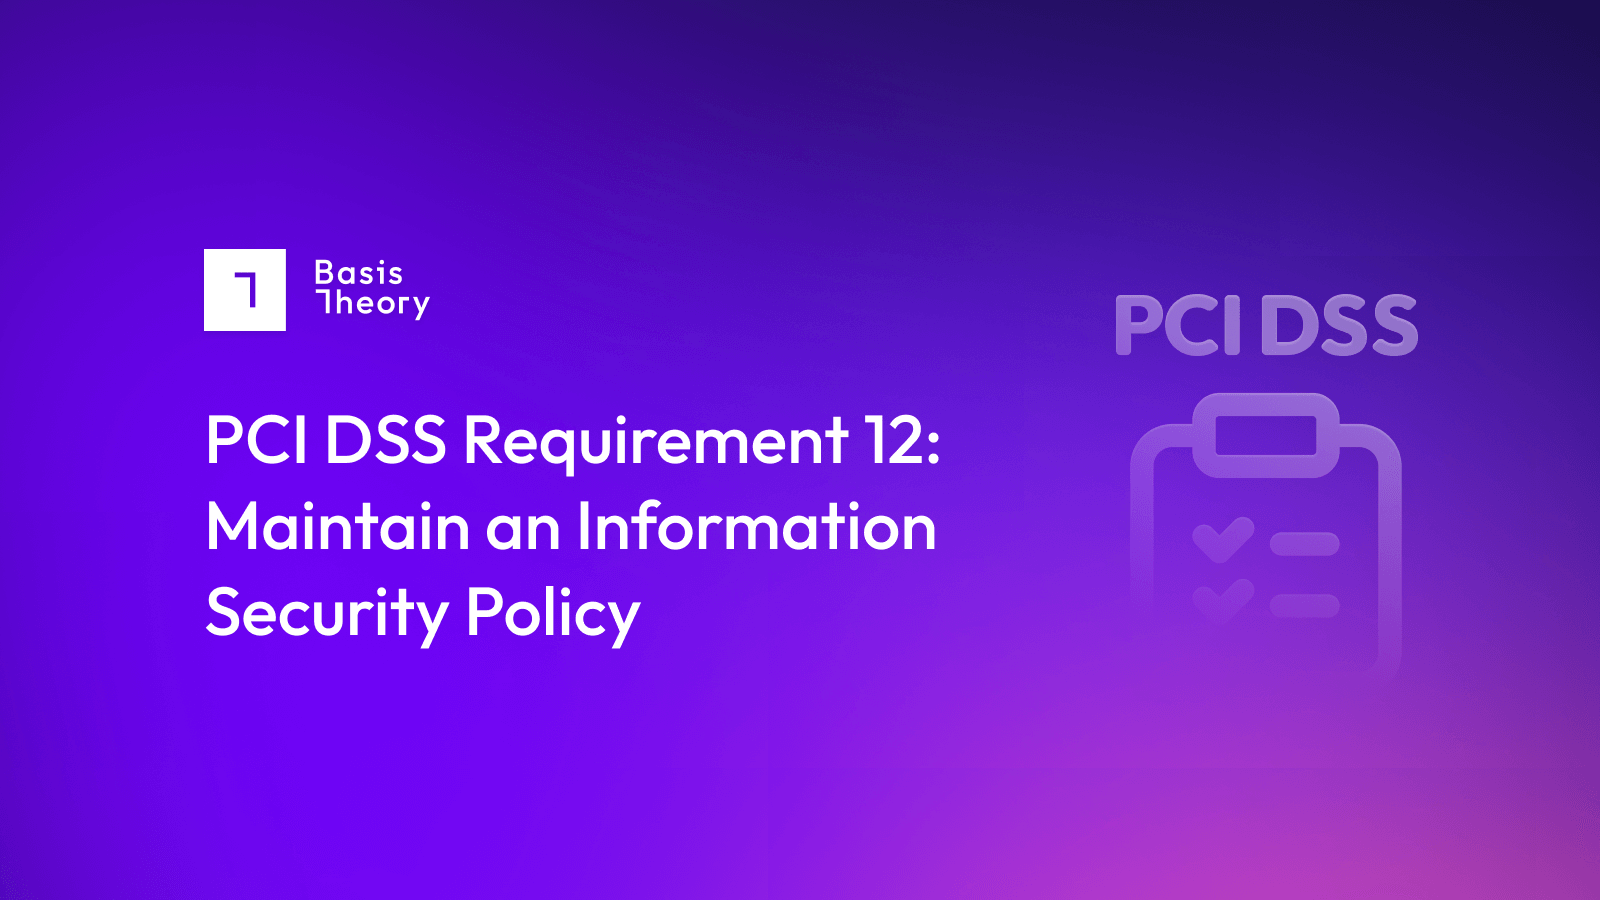 PCI DSS Requirement 12: Maintain an Information Security Policy